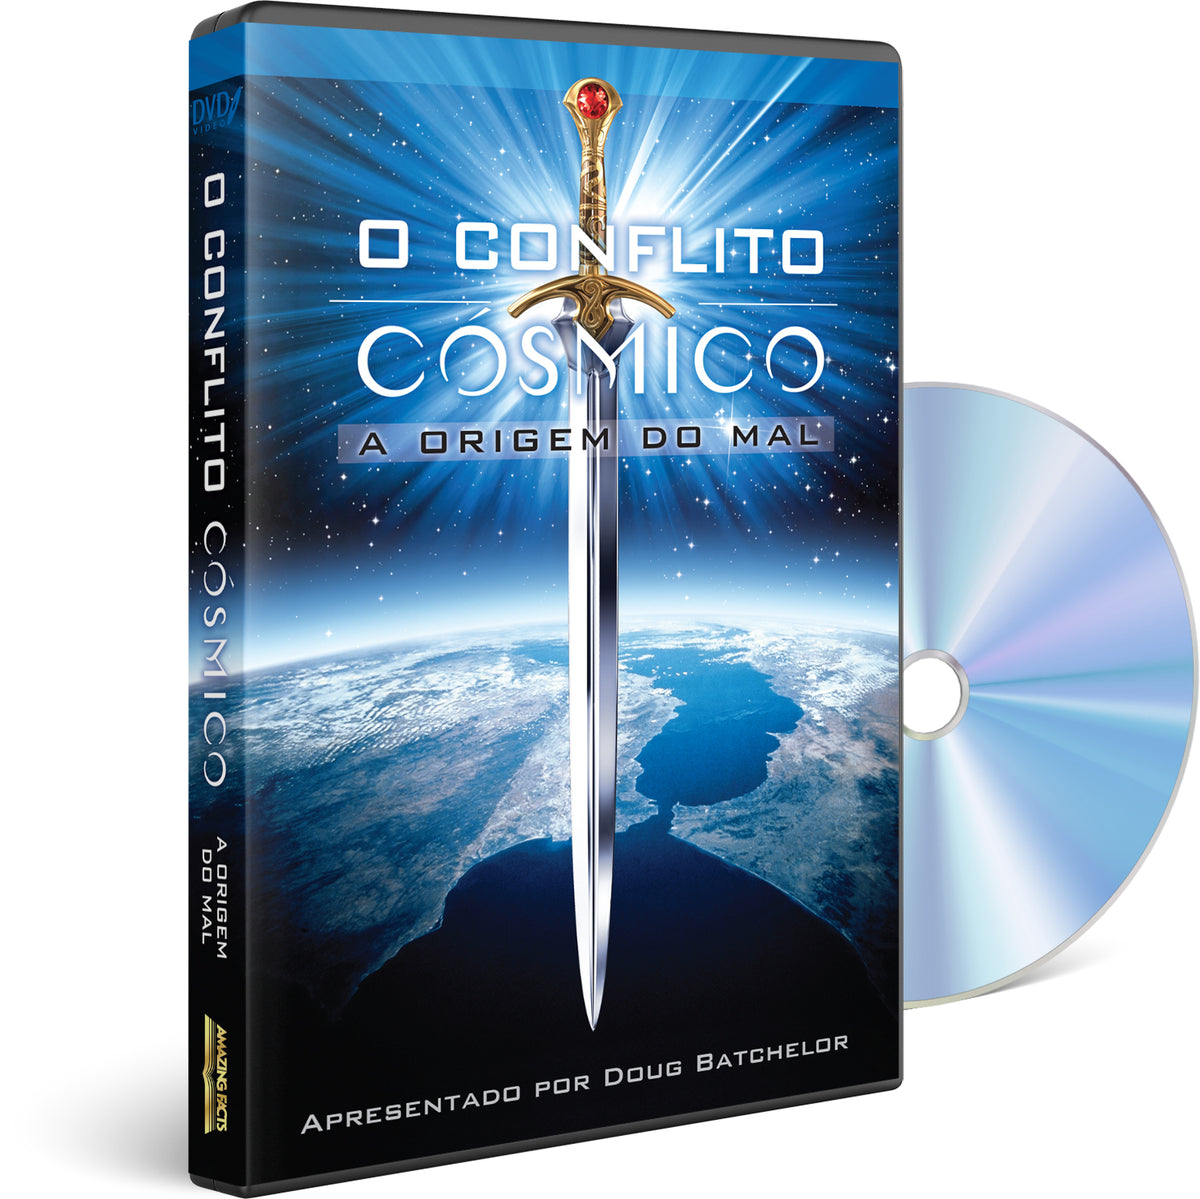 O Conflicto Cosmico (Cosmic Conflict: The Origin of Evil -Portuguese) by Doug Batchelor